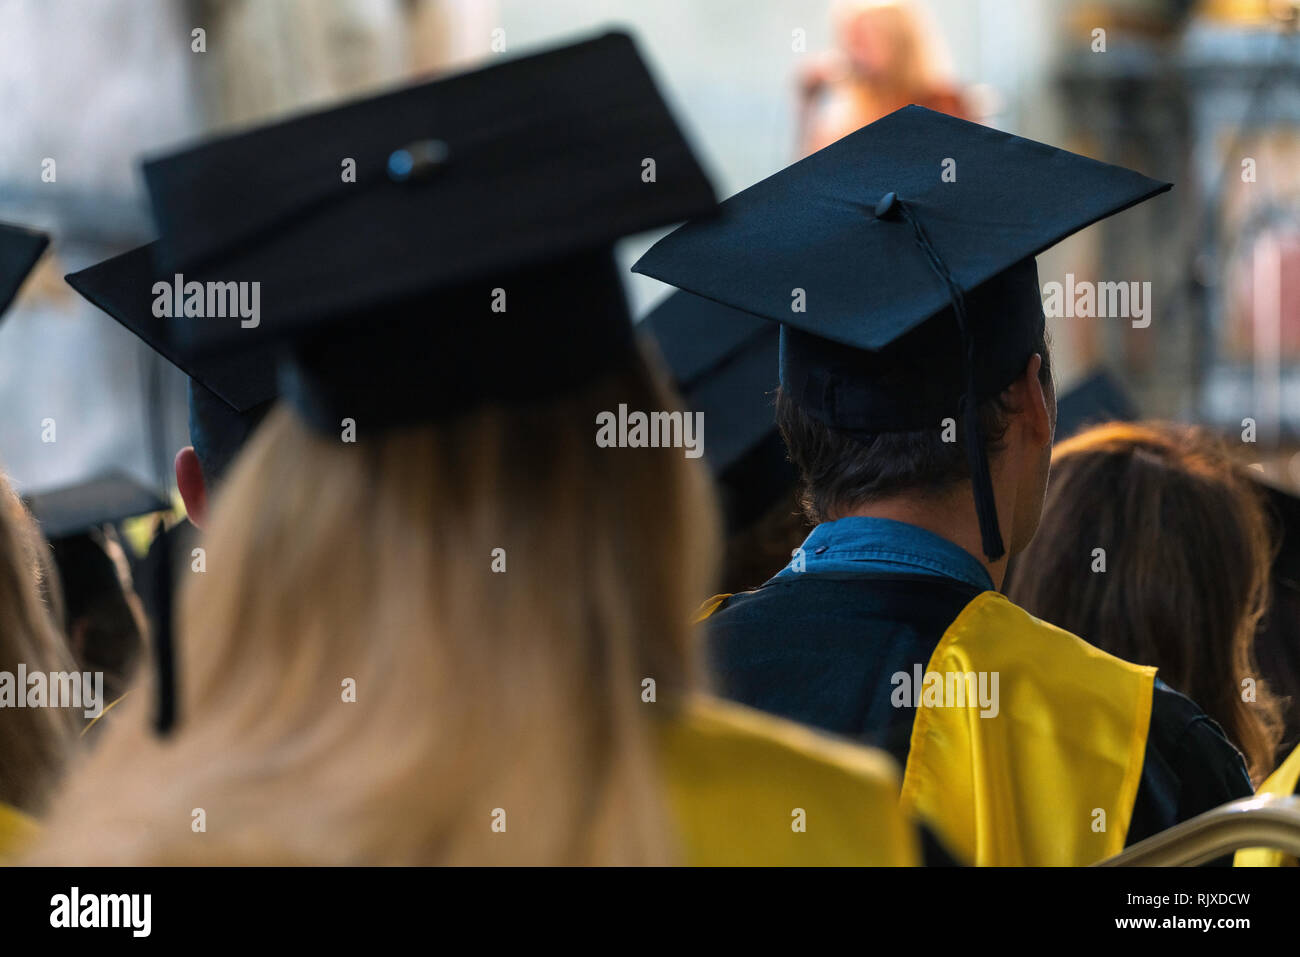 Students wearing gowns and hats sitting indoors, waiting to receive diplomas, graduation day in university, college commencement Stock Photo